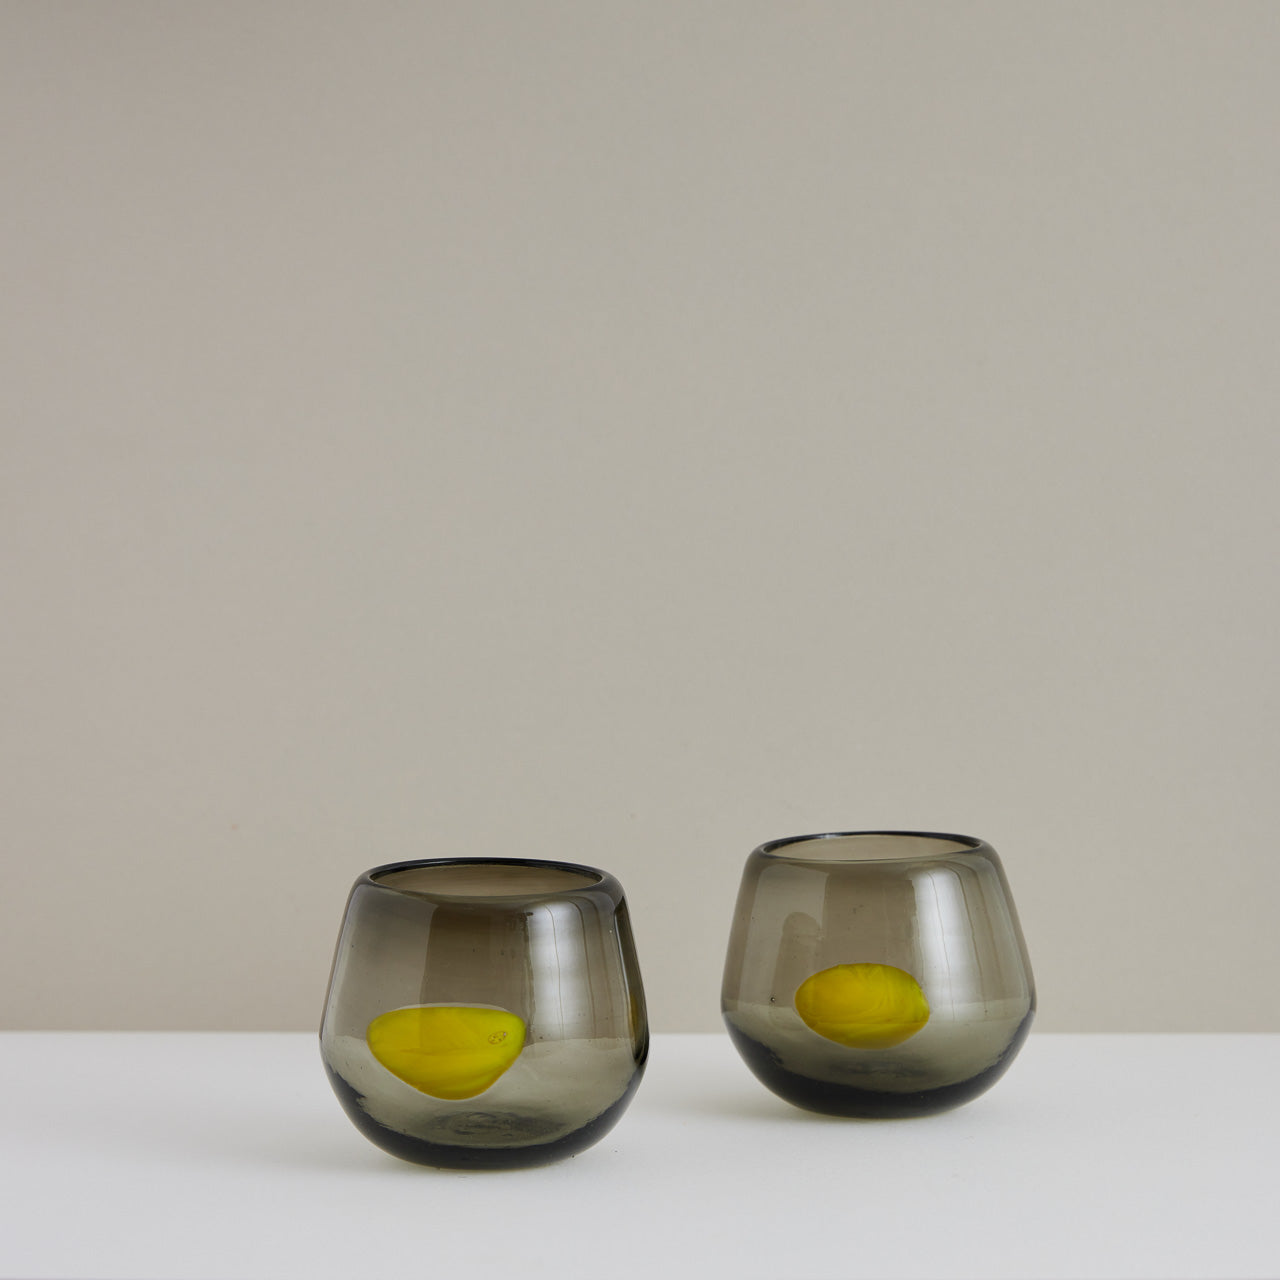 A pair of smoky gray handblown cocktail glasses with a yellow dot made in Mexico.